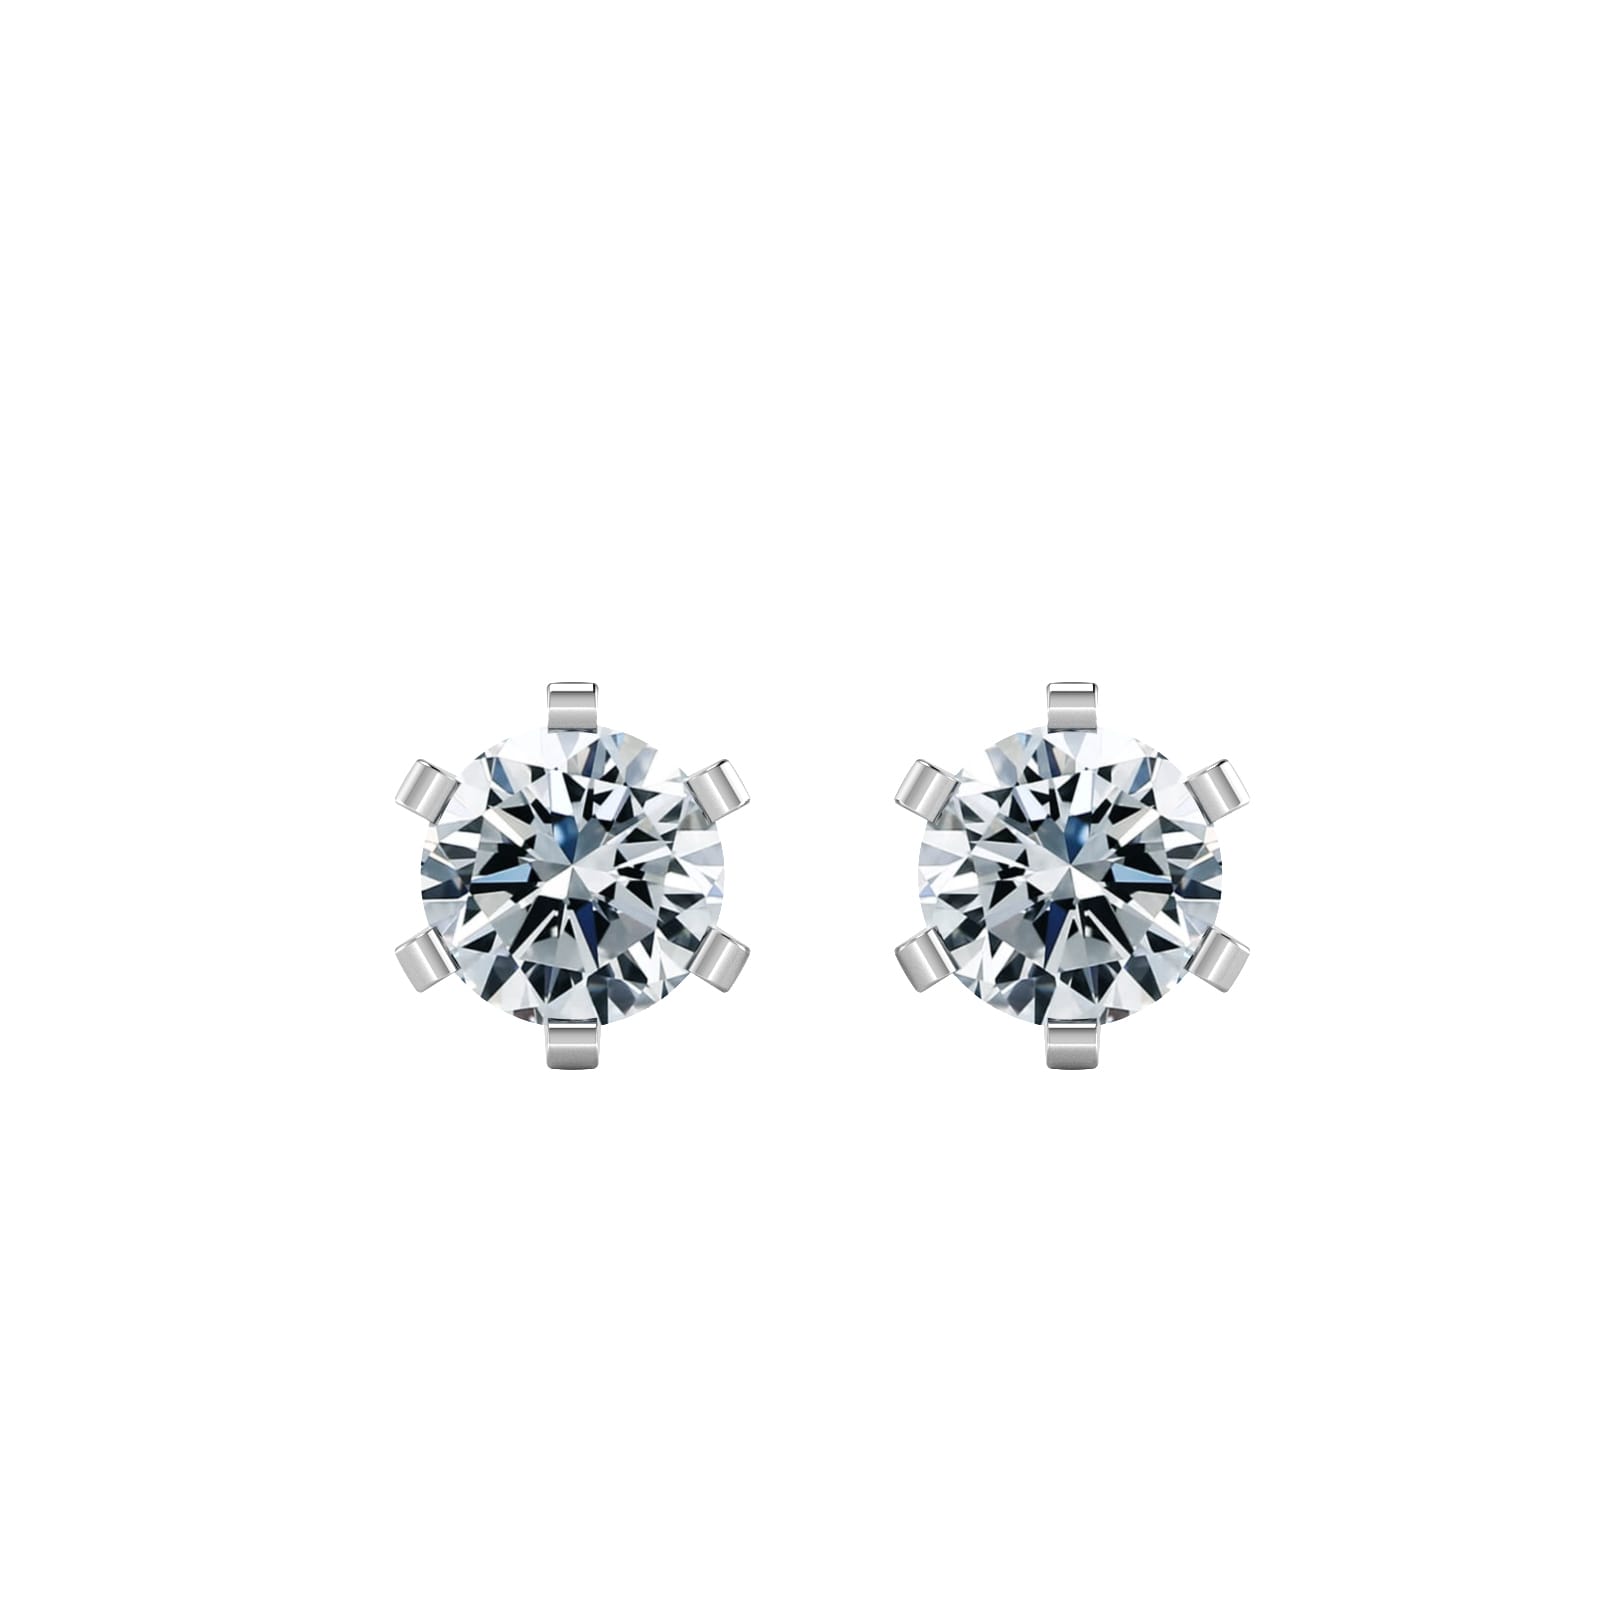 18ct White Gold 1.00cttw Solitaire Diamond Stud Earrings